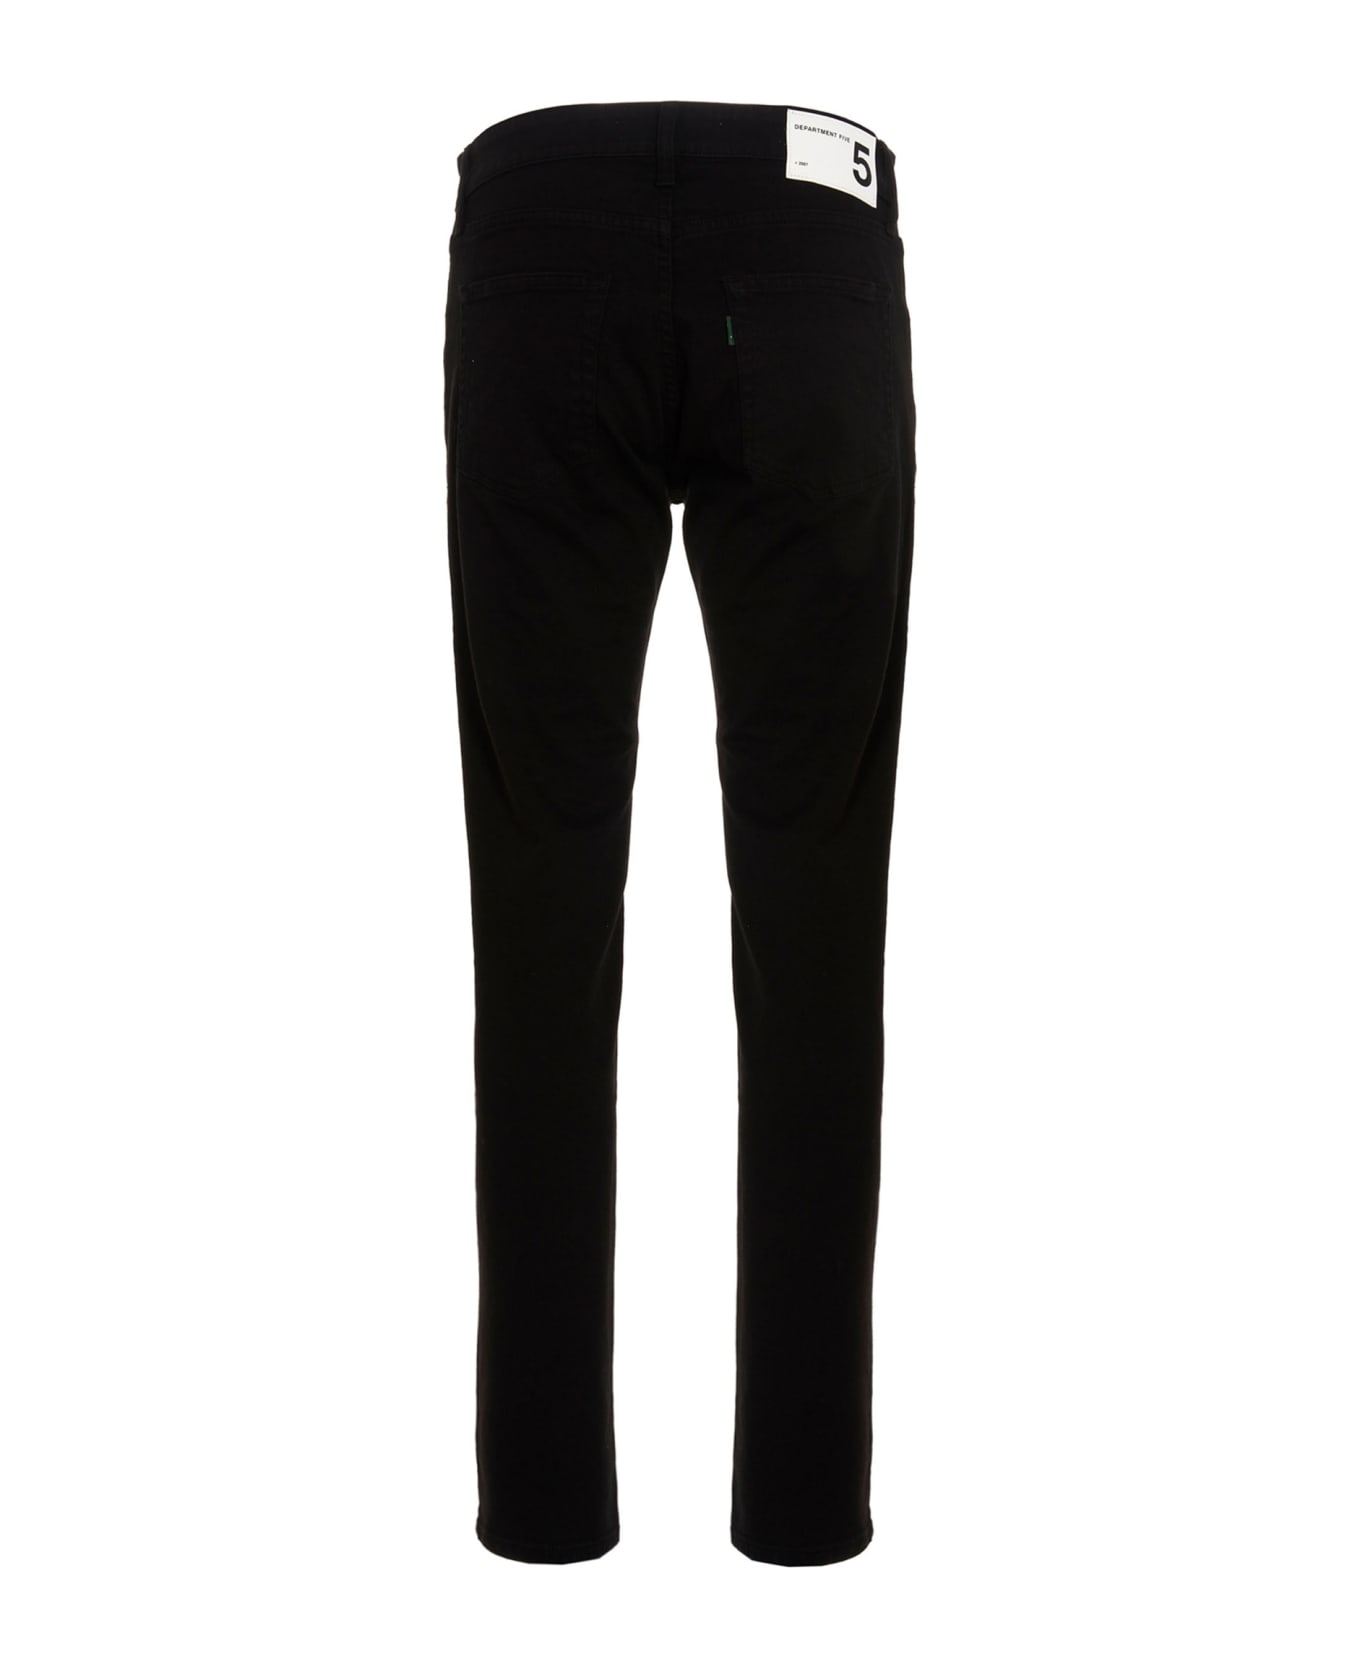 Department Five 'skeith' Jeans - Black  